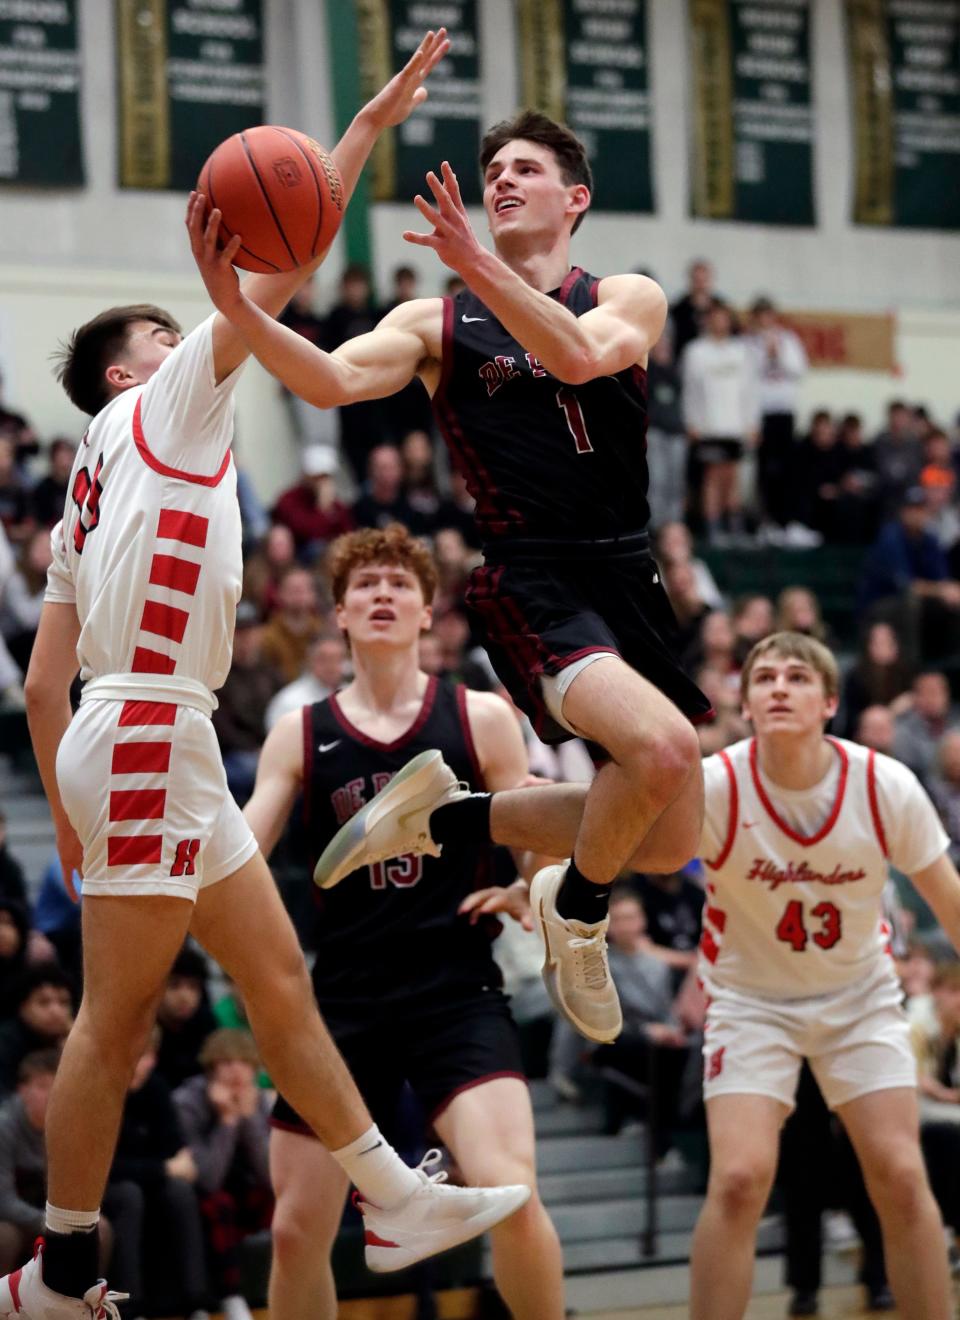 De Pere senior Johnny Kinziger (1) was named co-recipient of the Mr. Basketball Award on Friday.